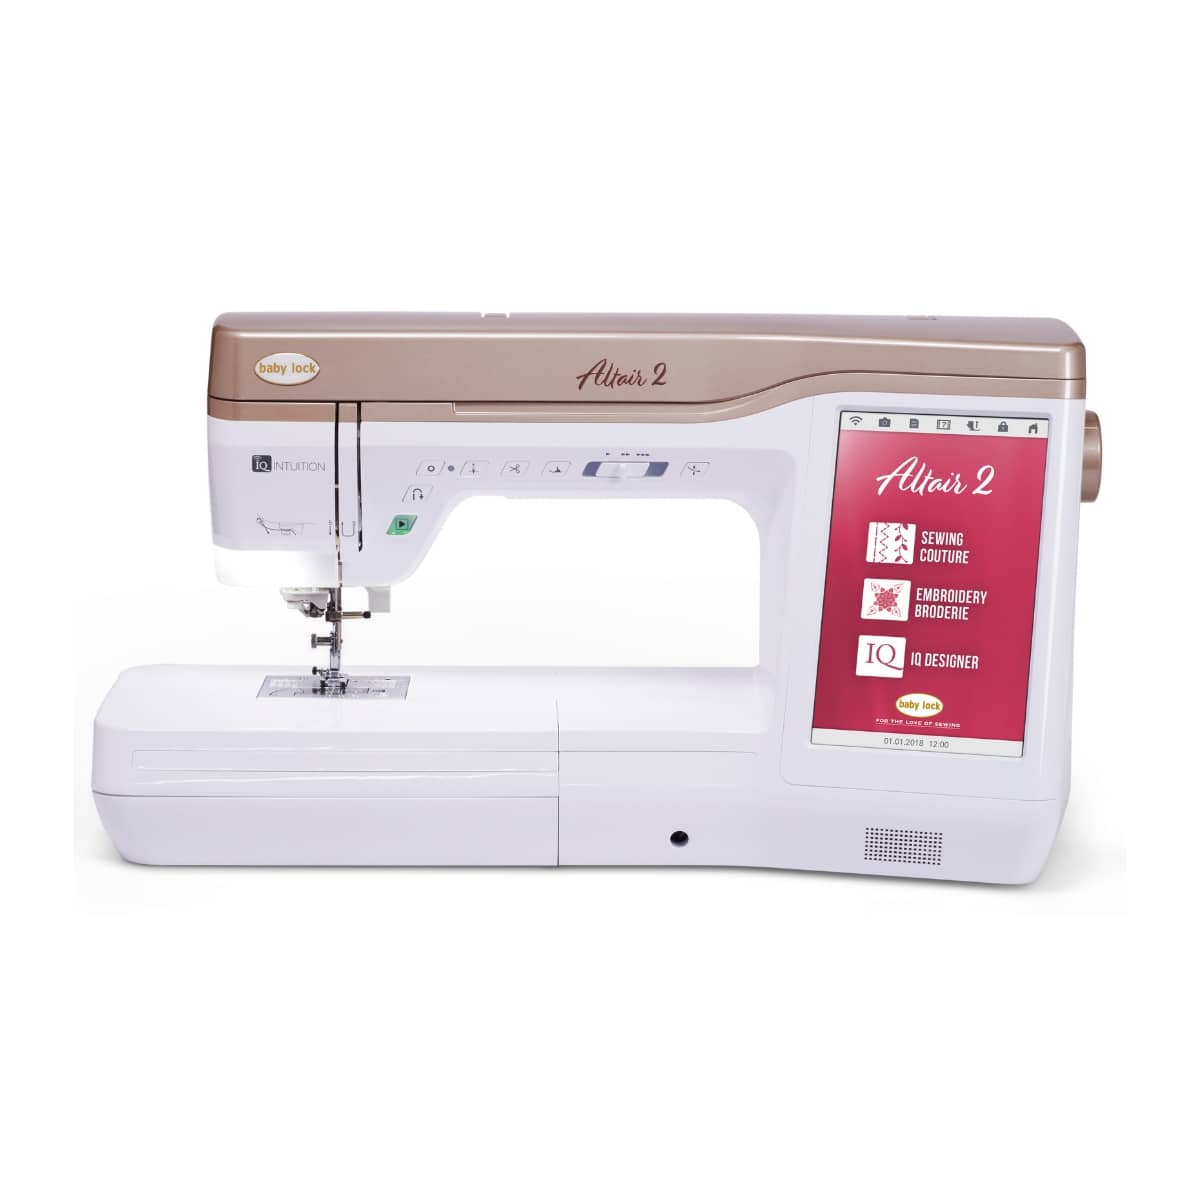 Koala Embroidery Center Pro - Moore's Sewing